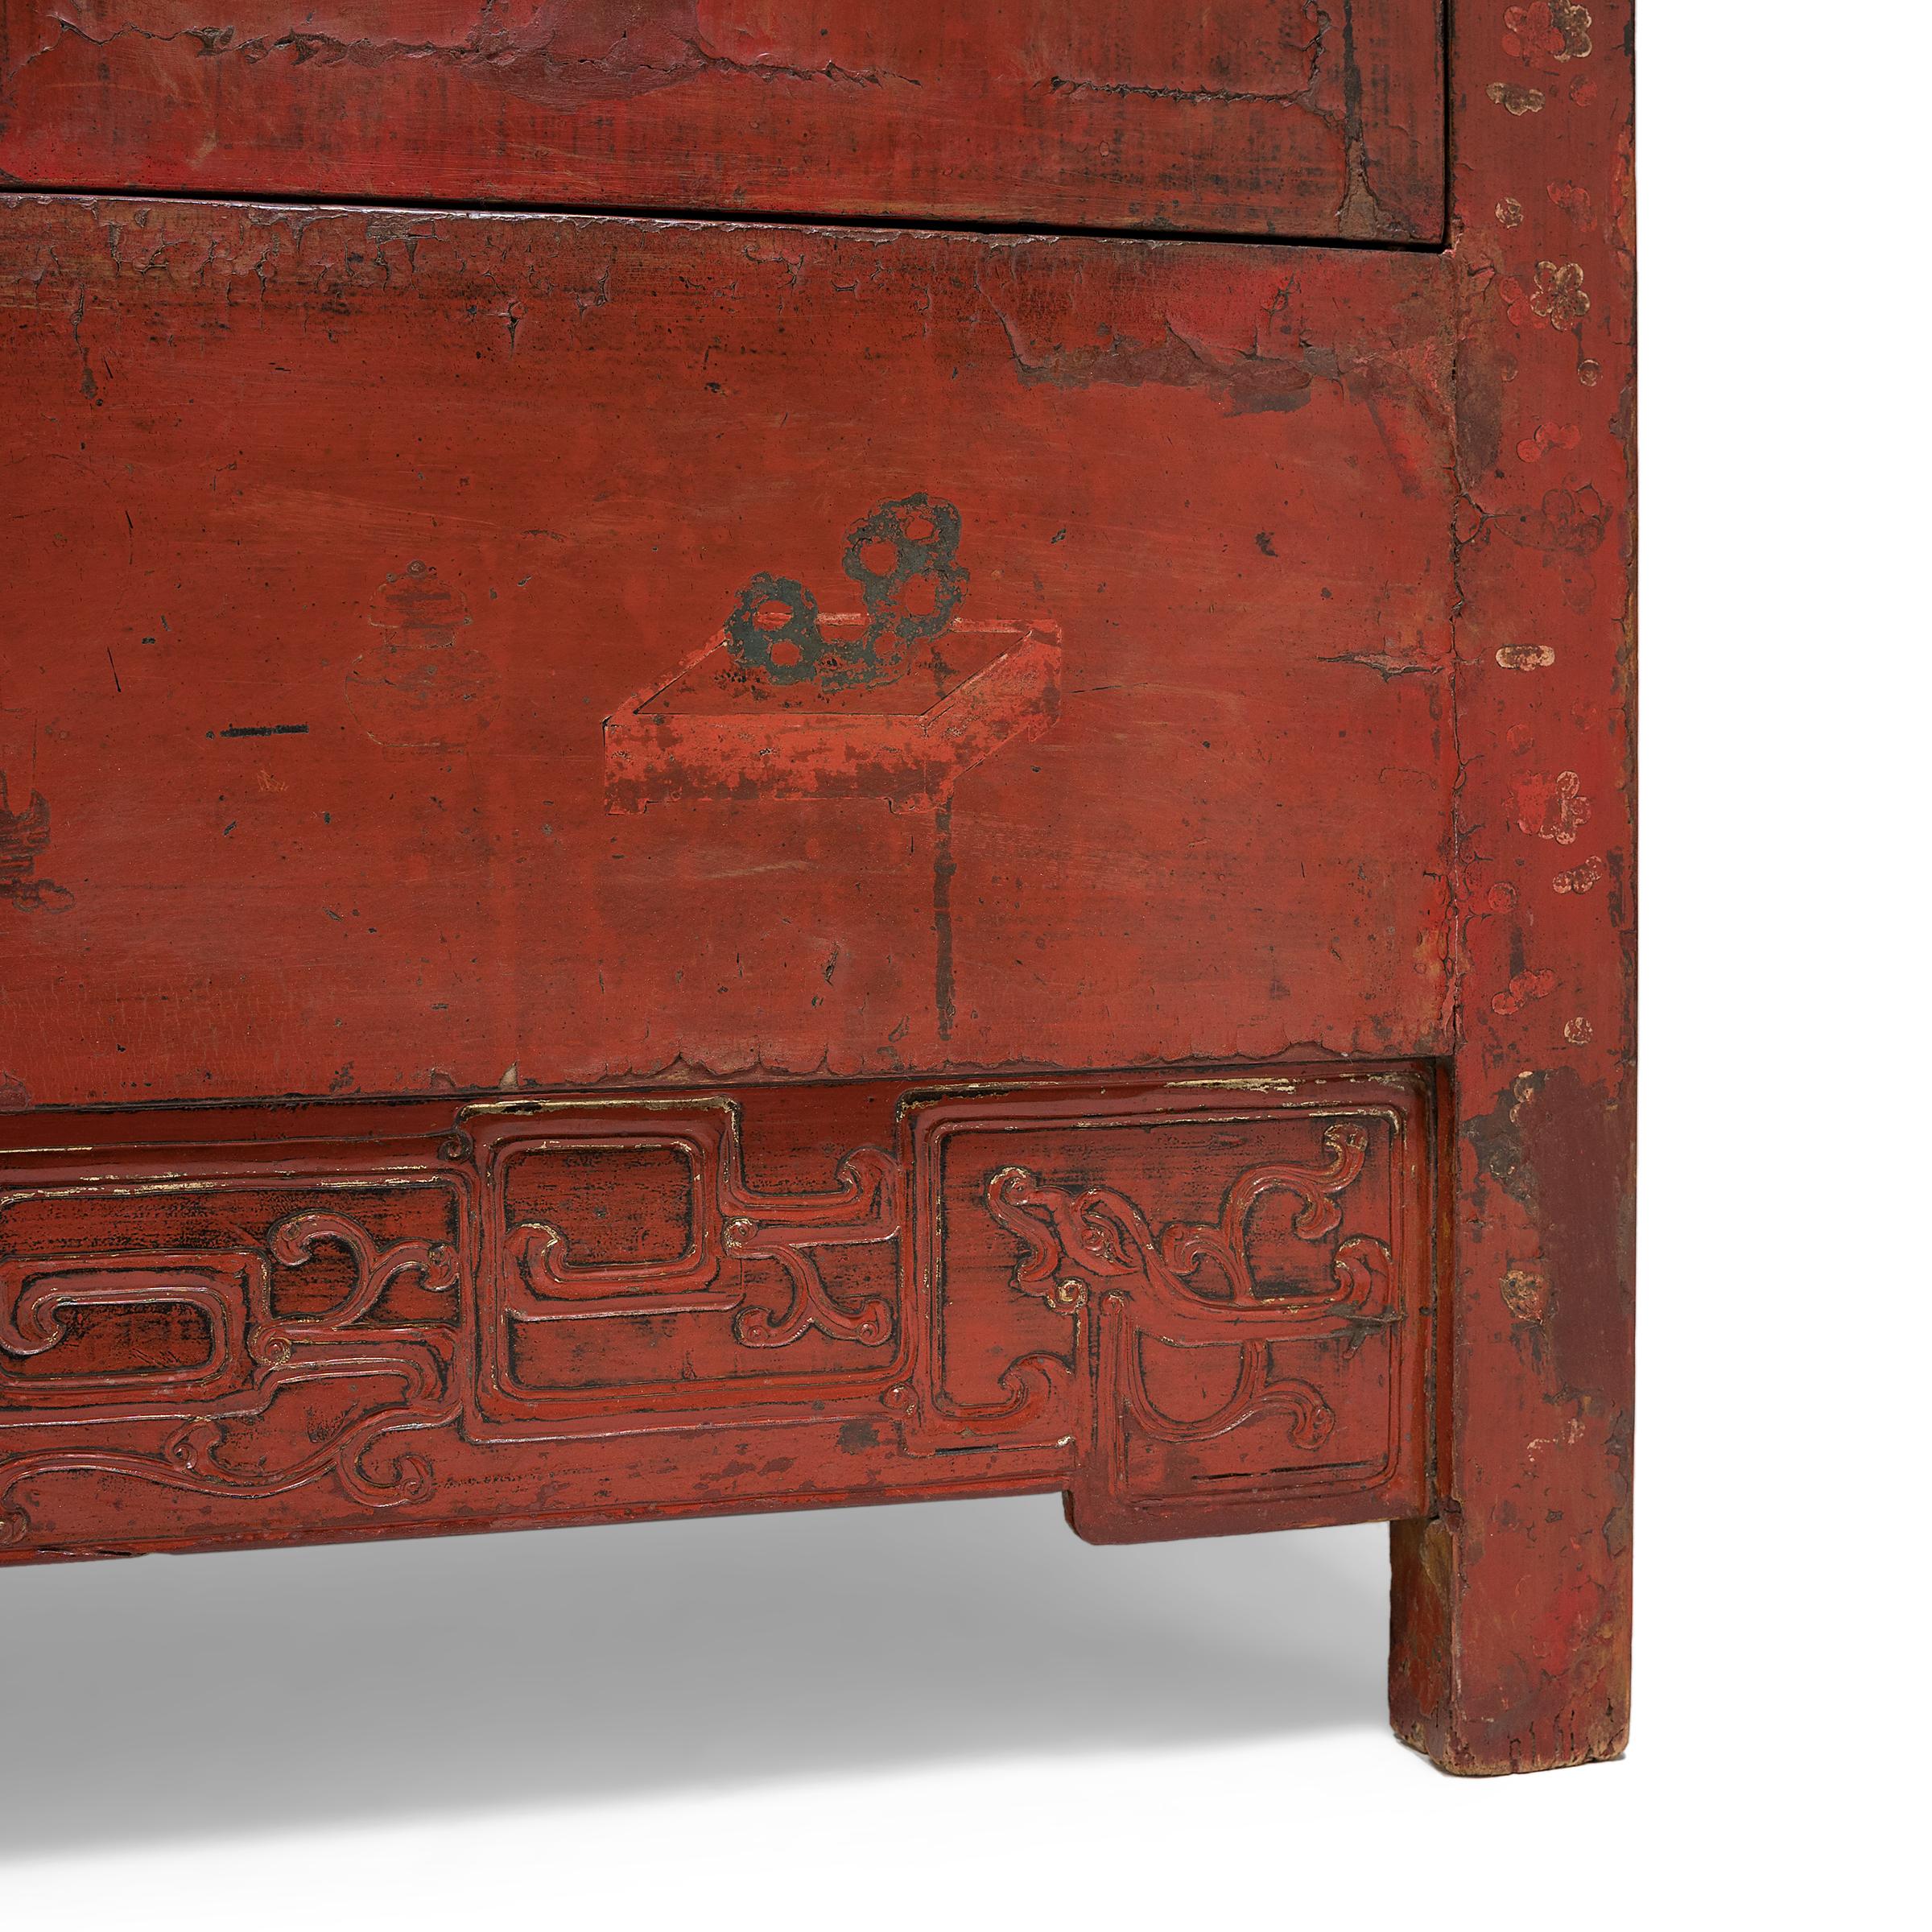 Painted Chinese Red Lacquer Wedding Cabinet, c. 1850 For Sale 2